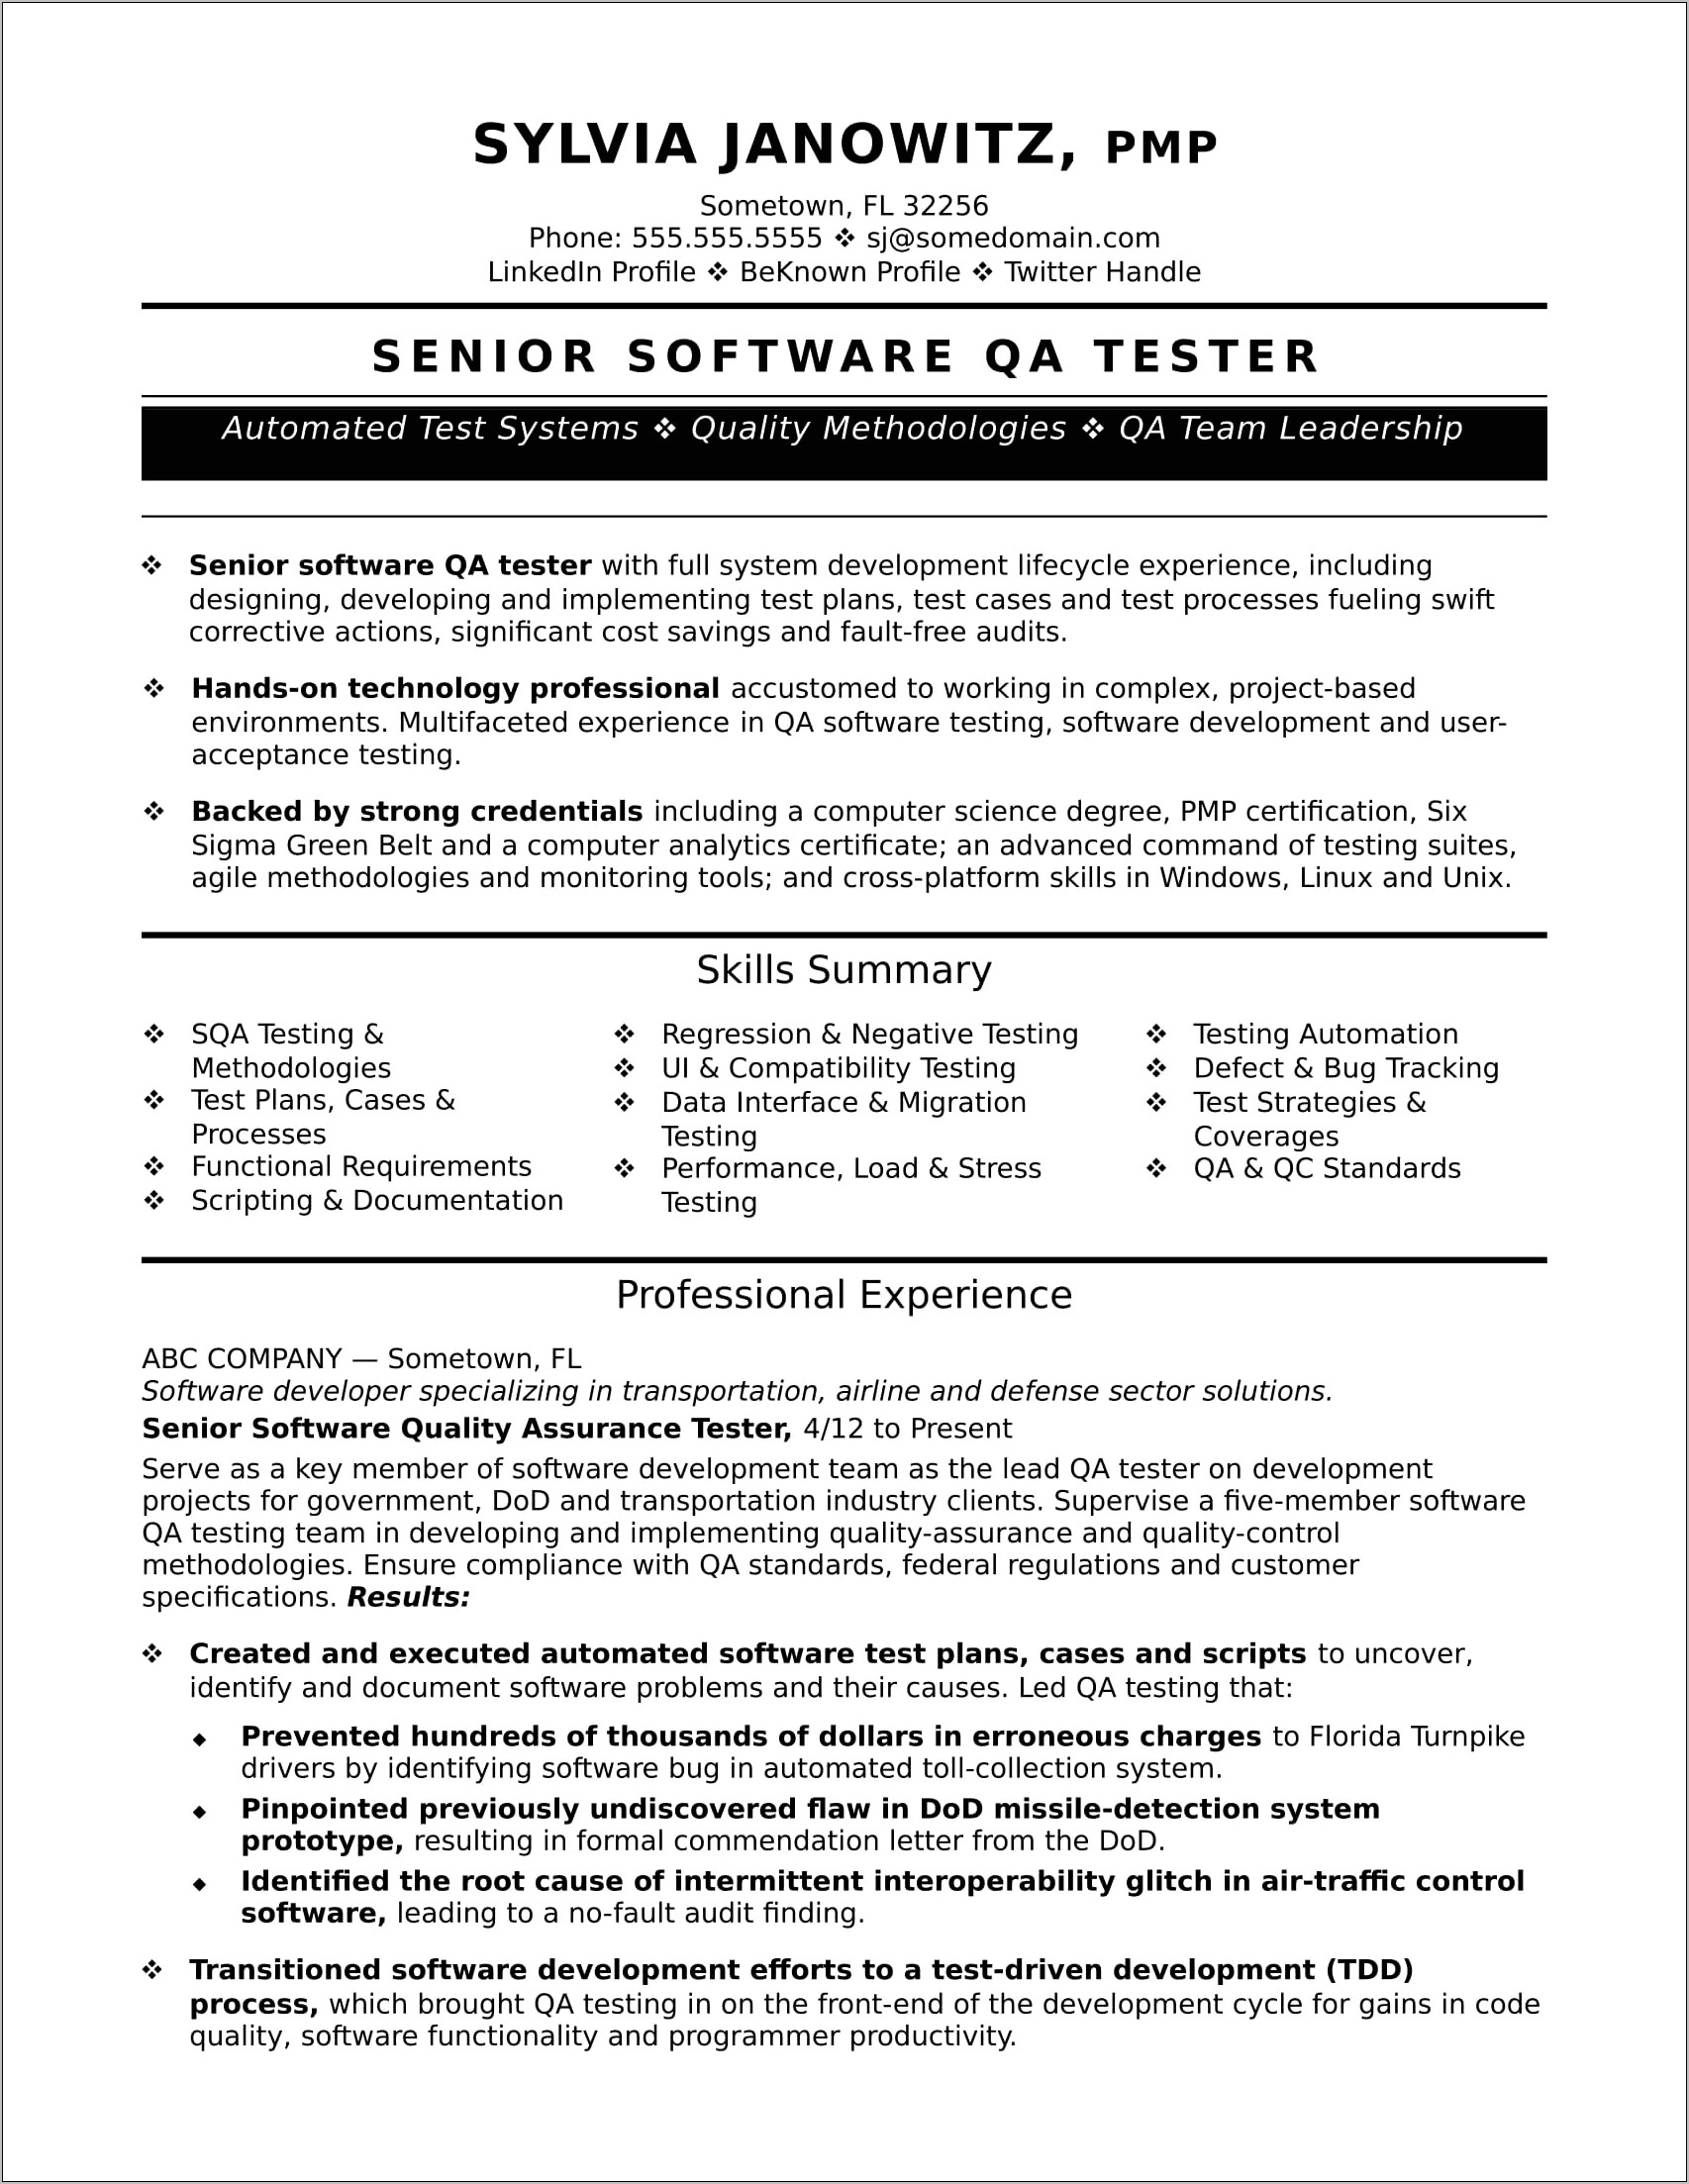 Good Summary For Resume Of Quality Engineer